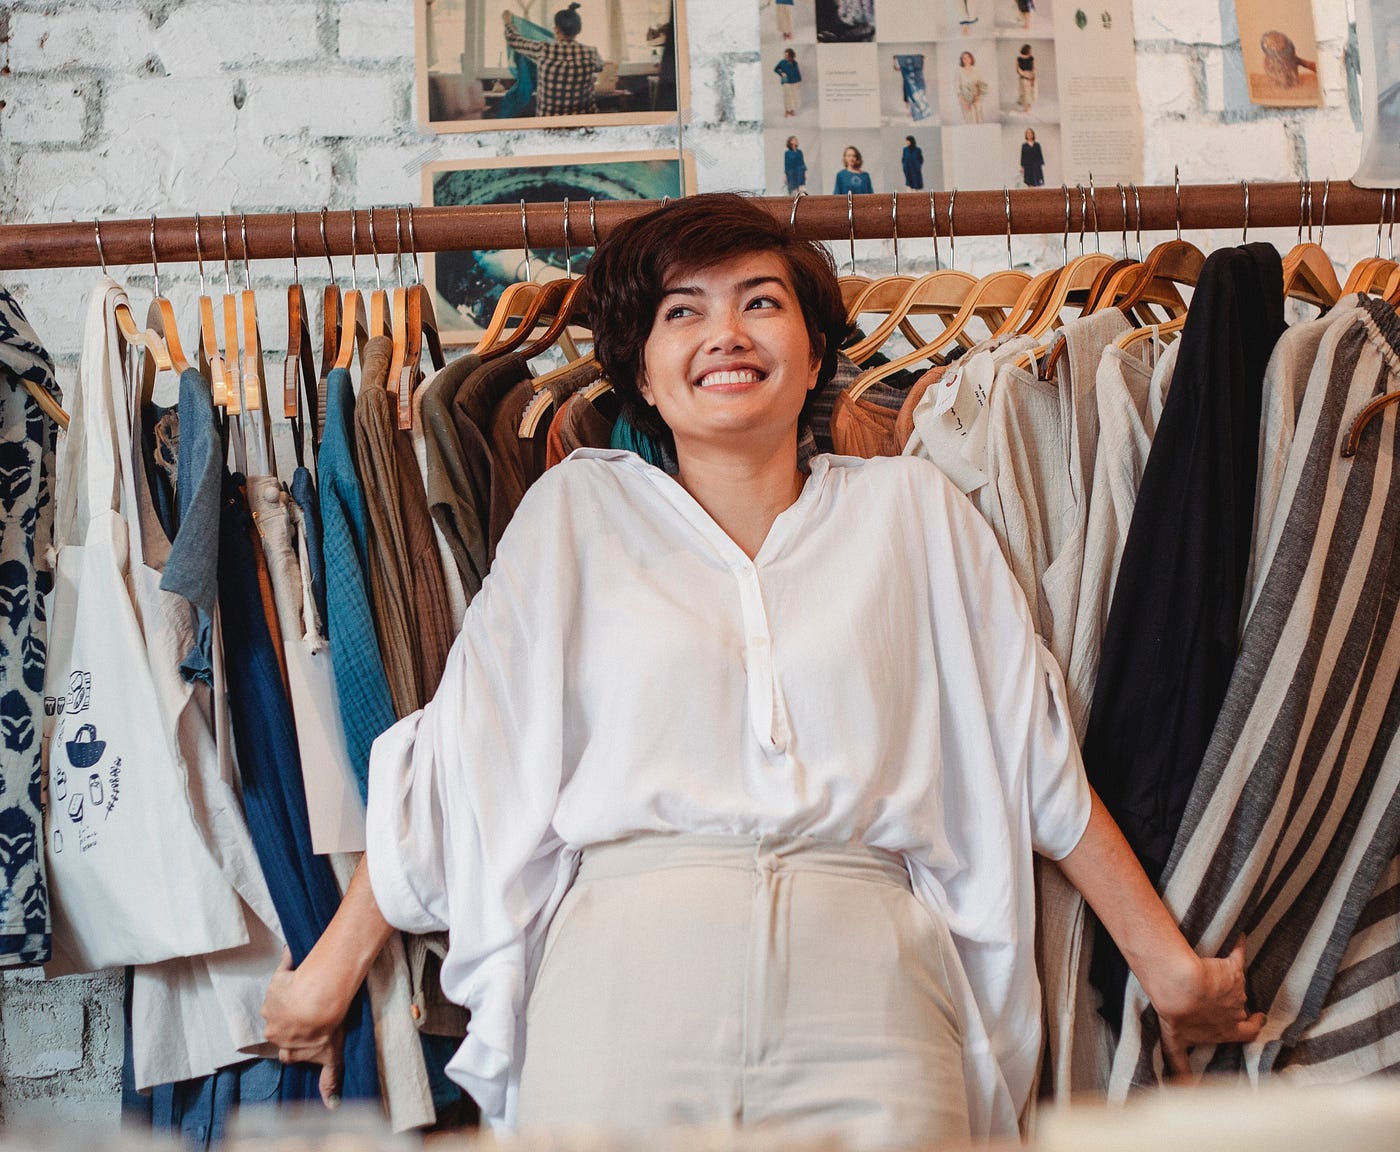 Woman smiling in front of a rack of clothes.